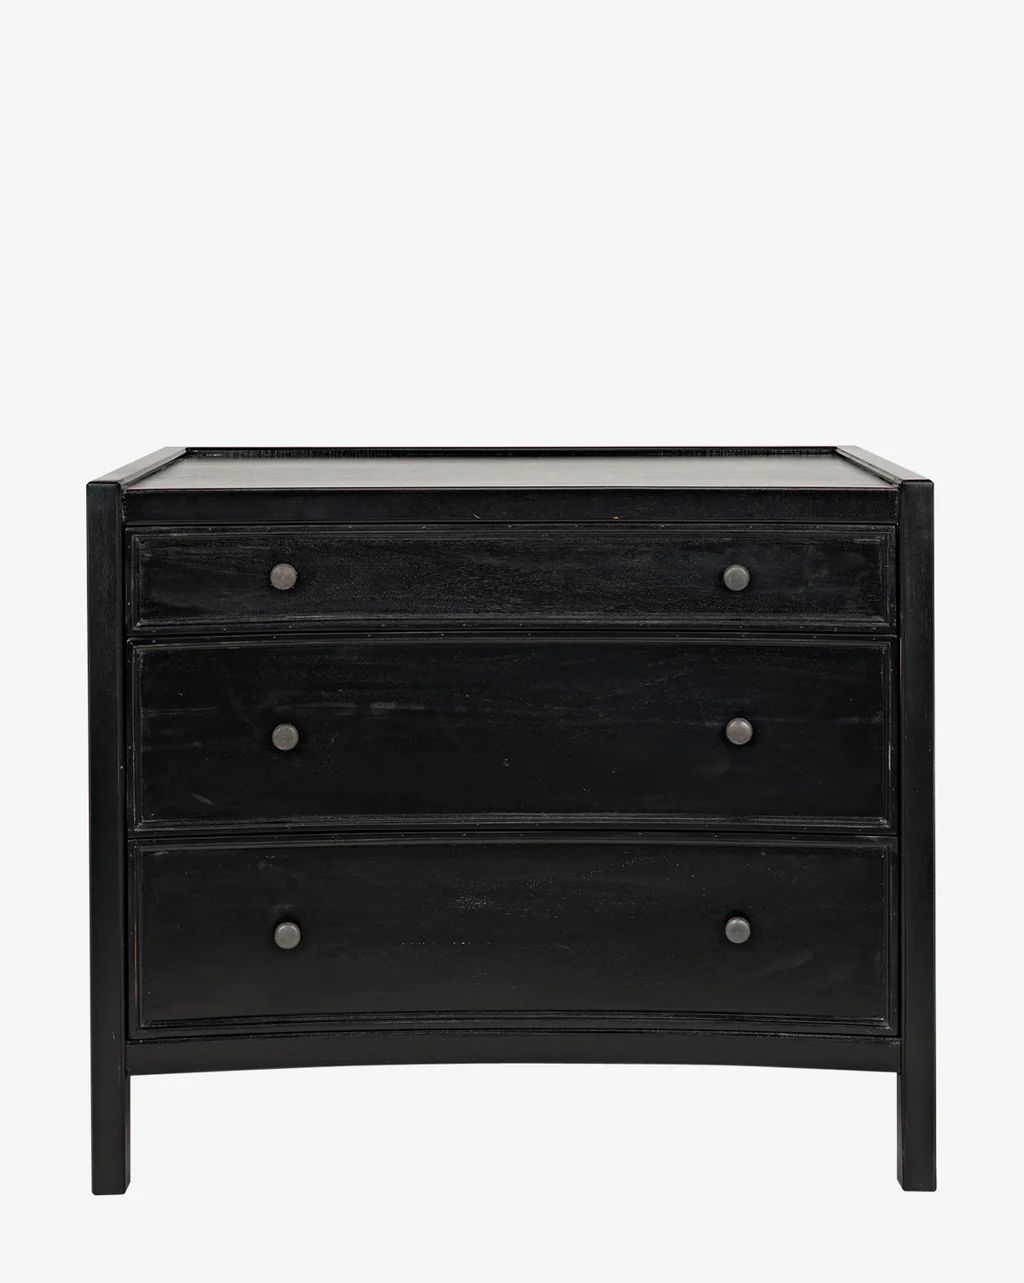 Hale Chest | McGee & Co.